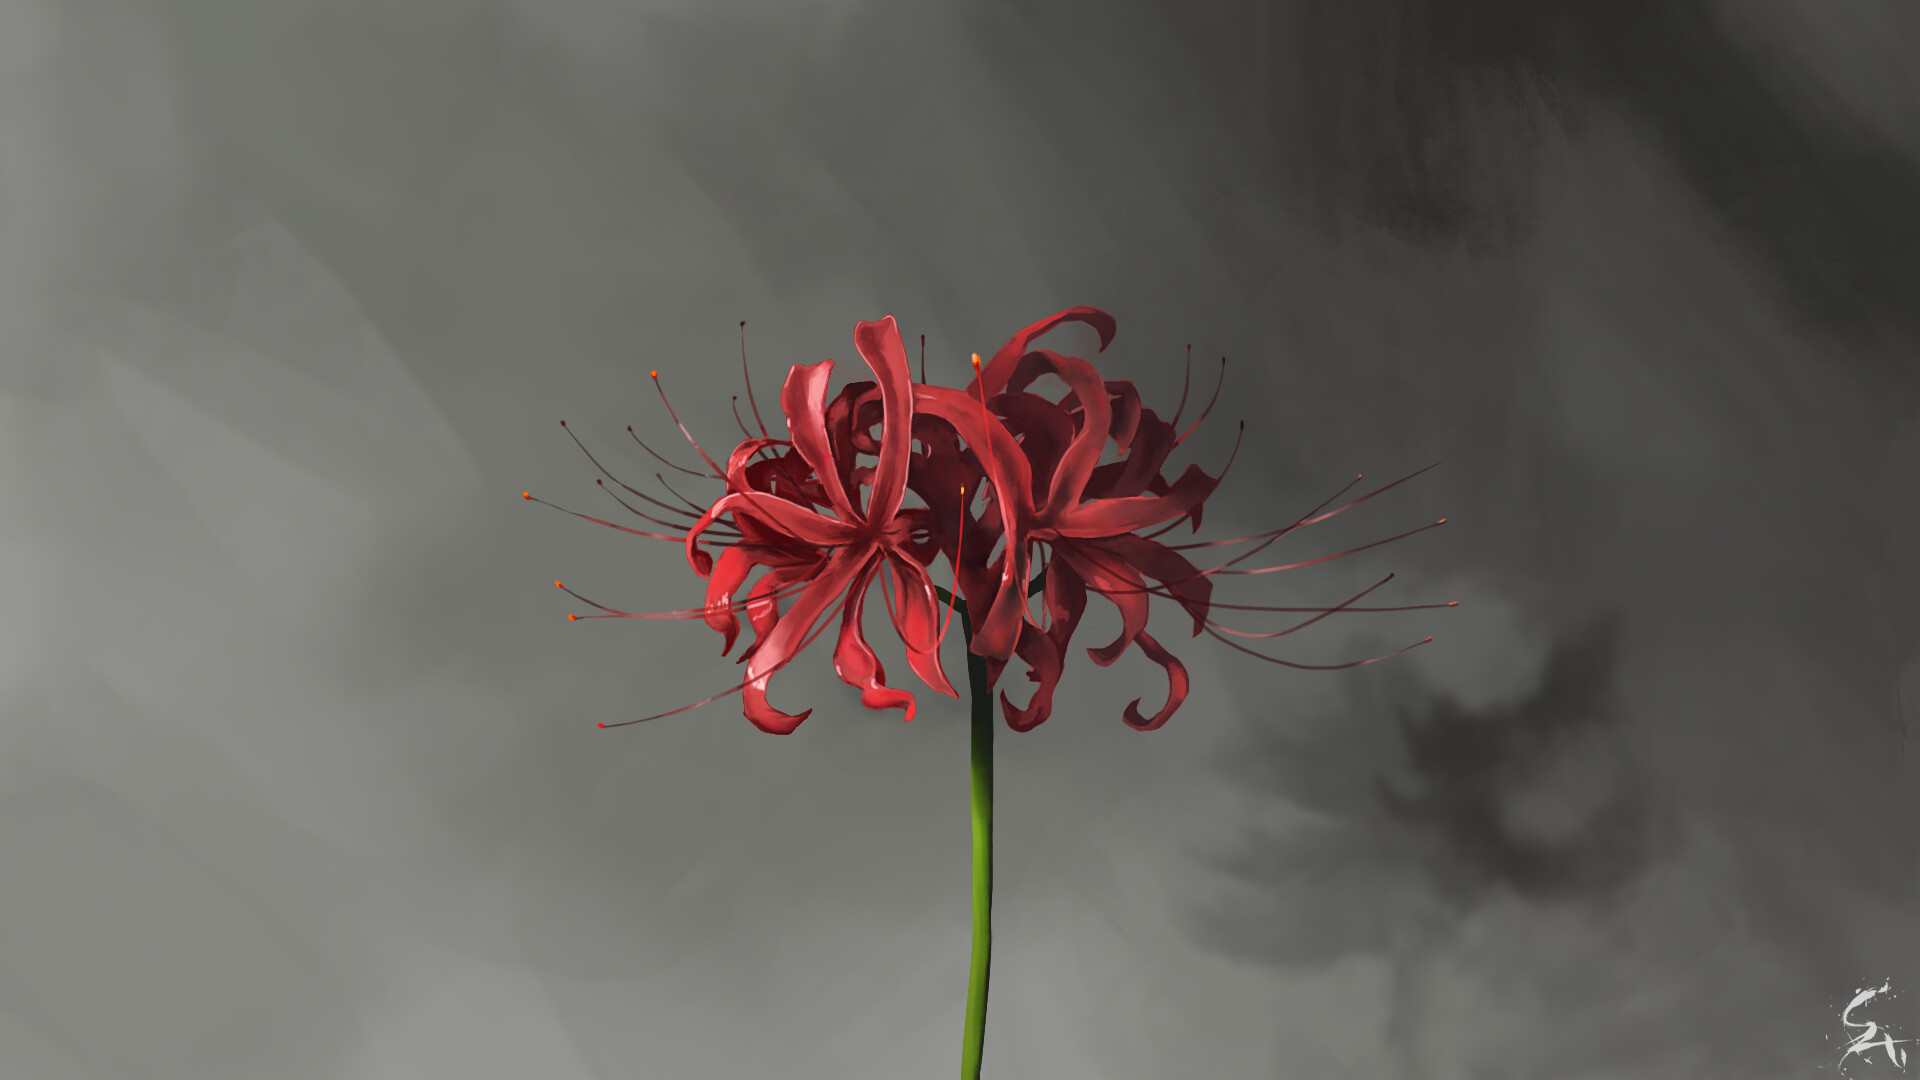 Spider lilies m4a4 фото 47